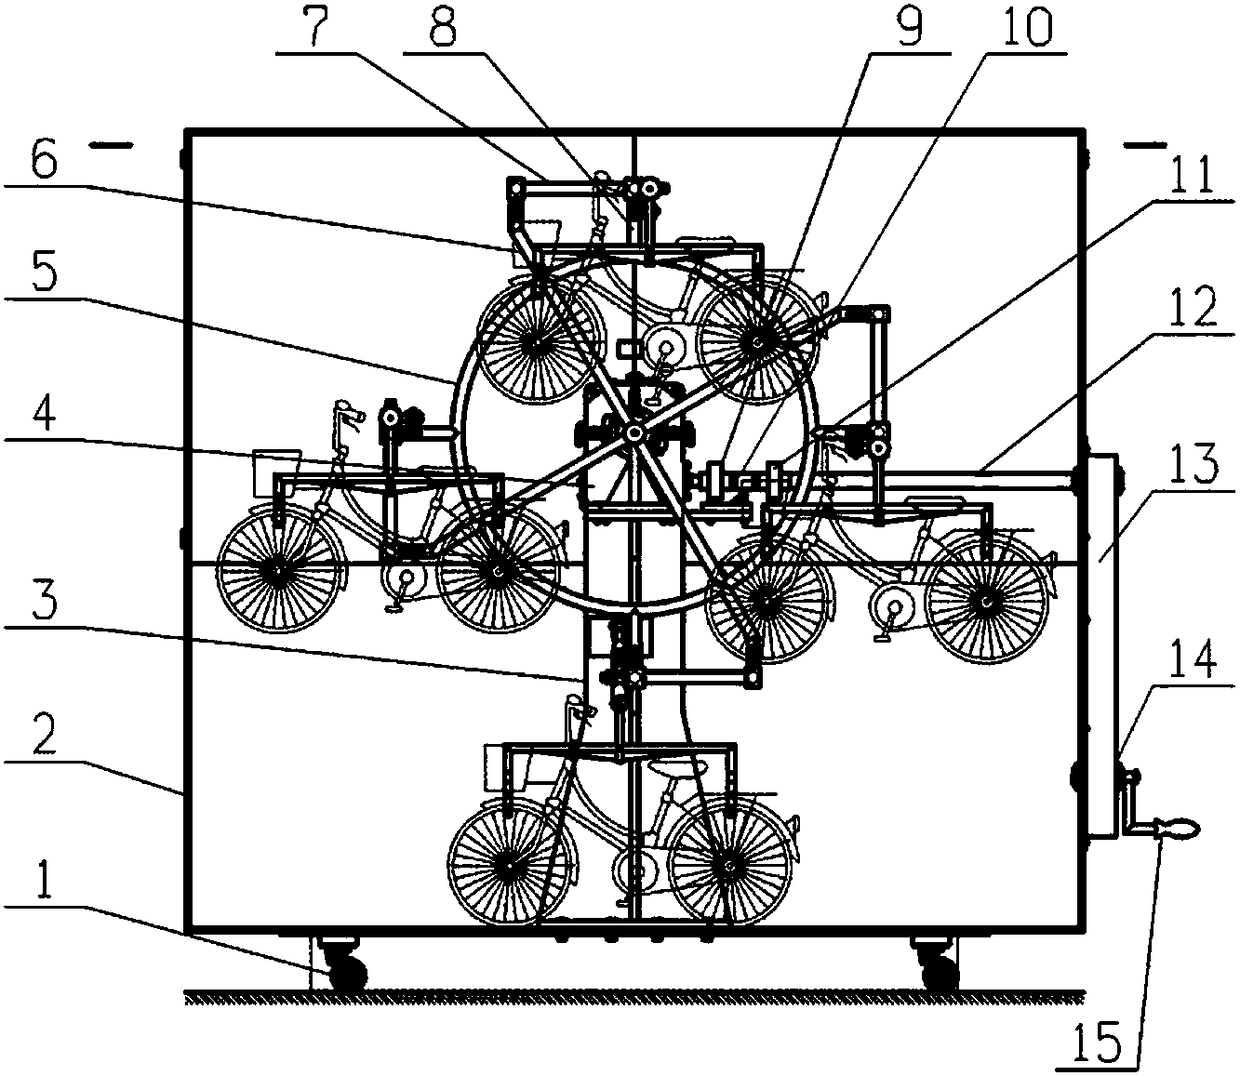 Double-rotation worm drive type shared bike storage device with swinging hanging arms